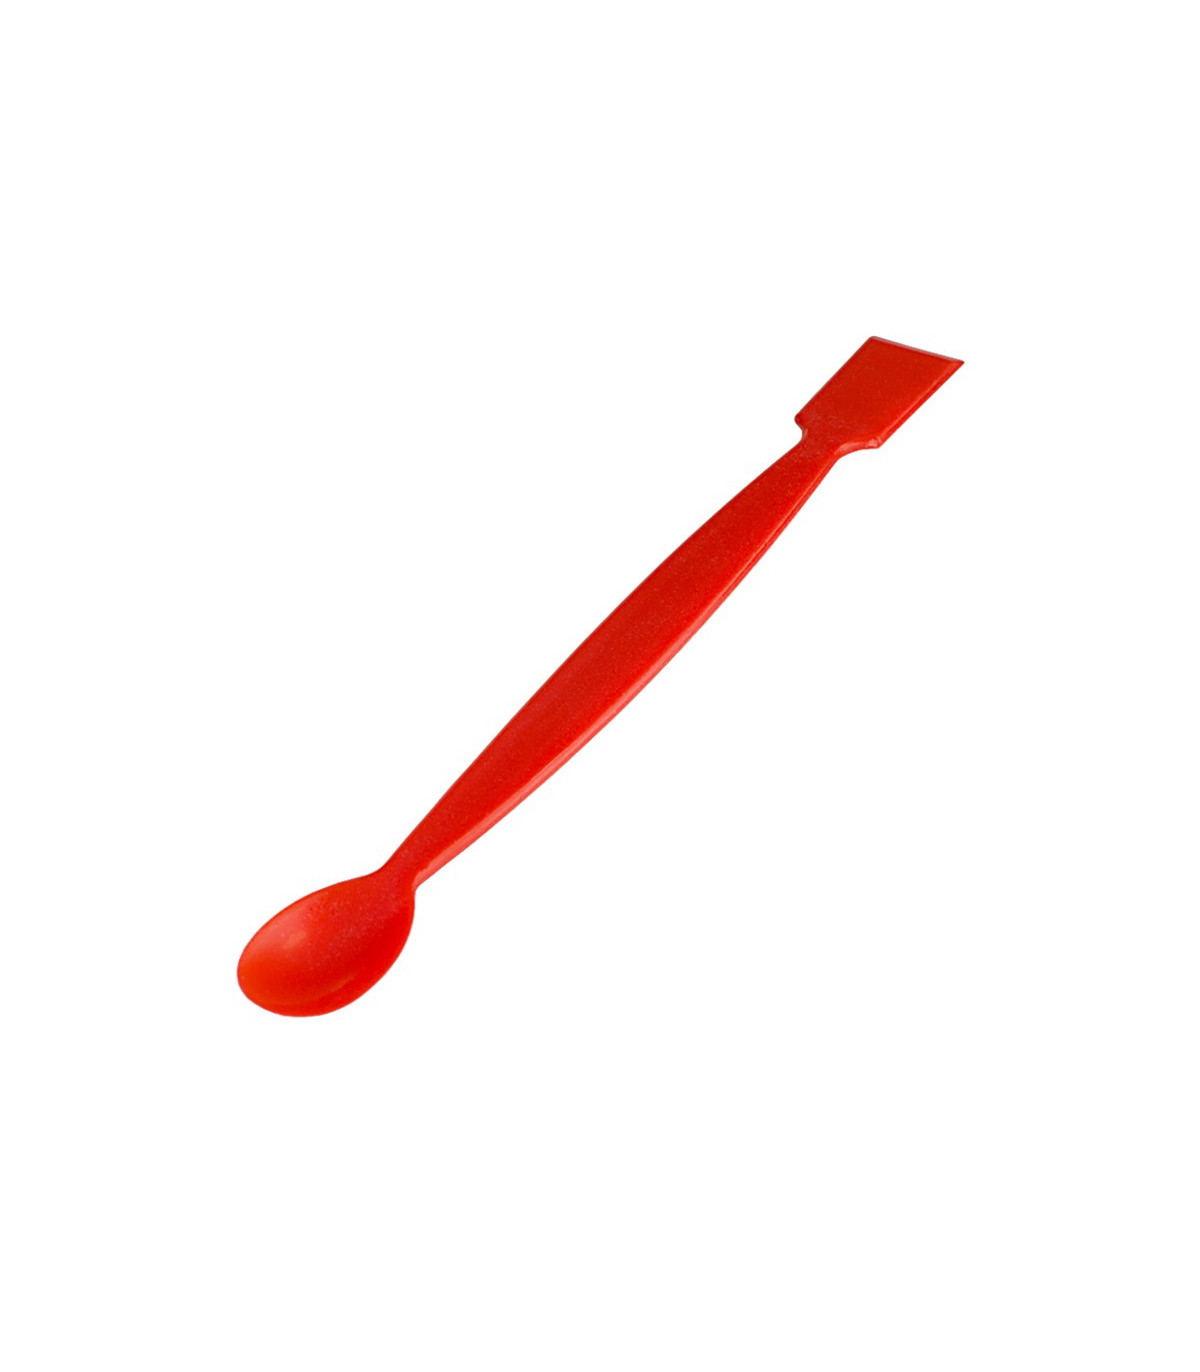 Laboratory Spatula with two ends